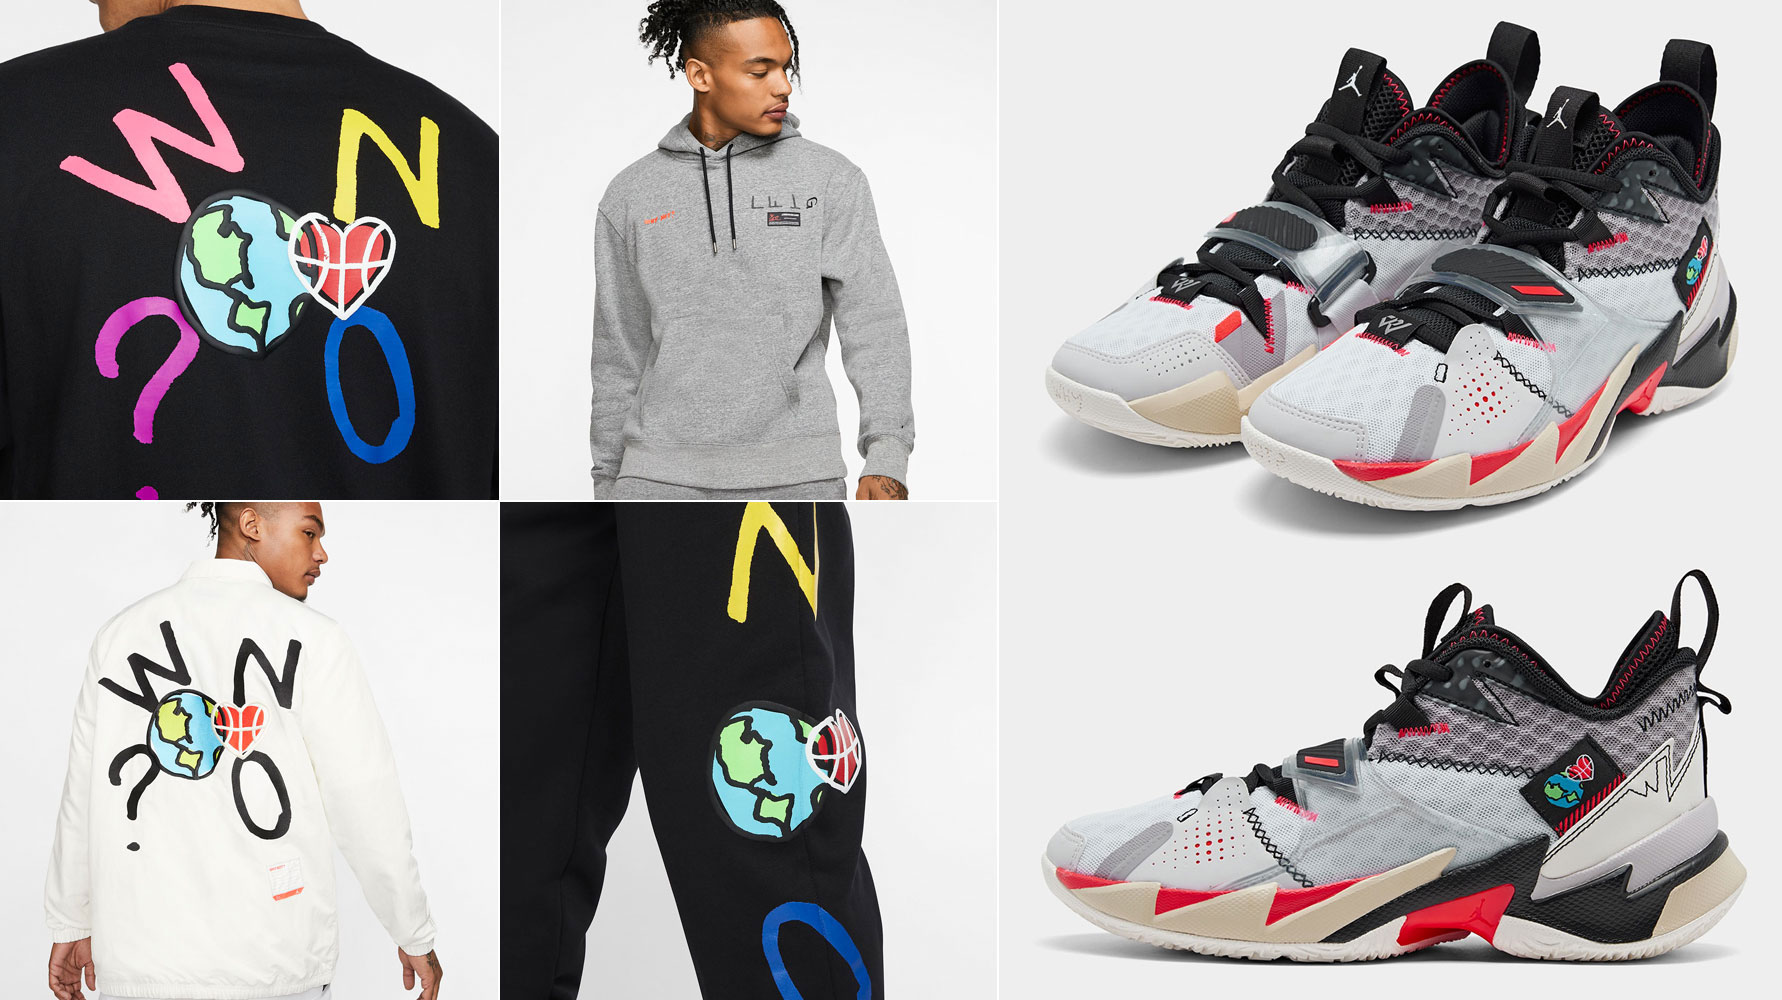 jordan-why-not-zer03-unite-apparel-outfits